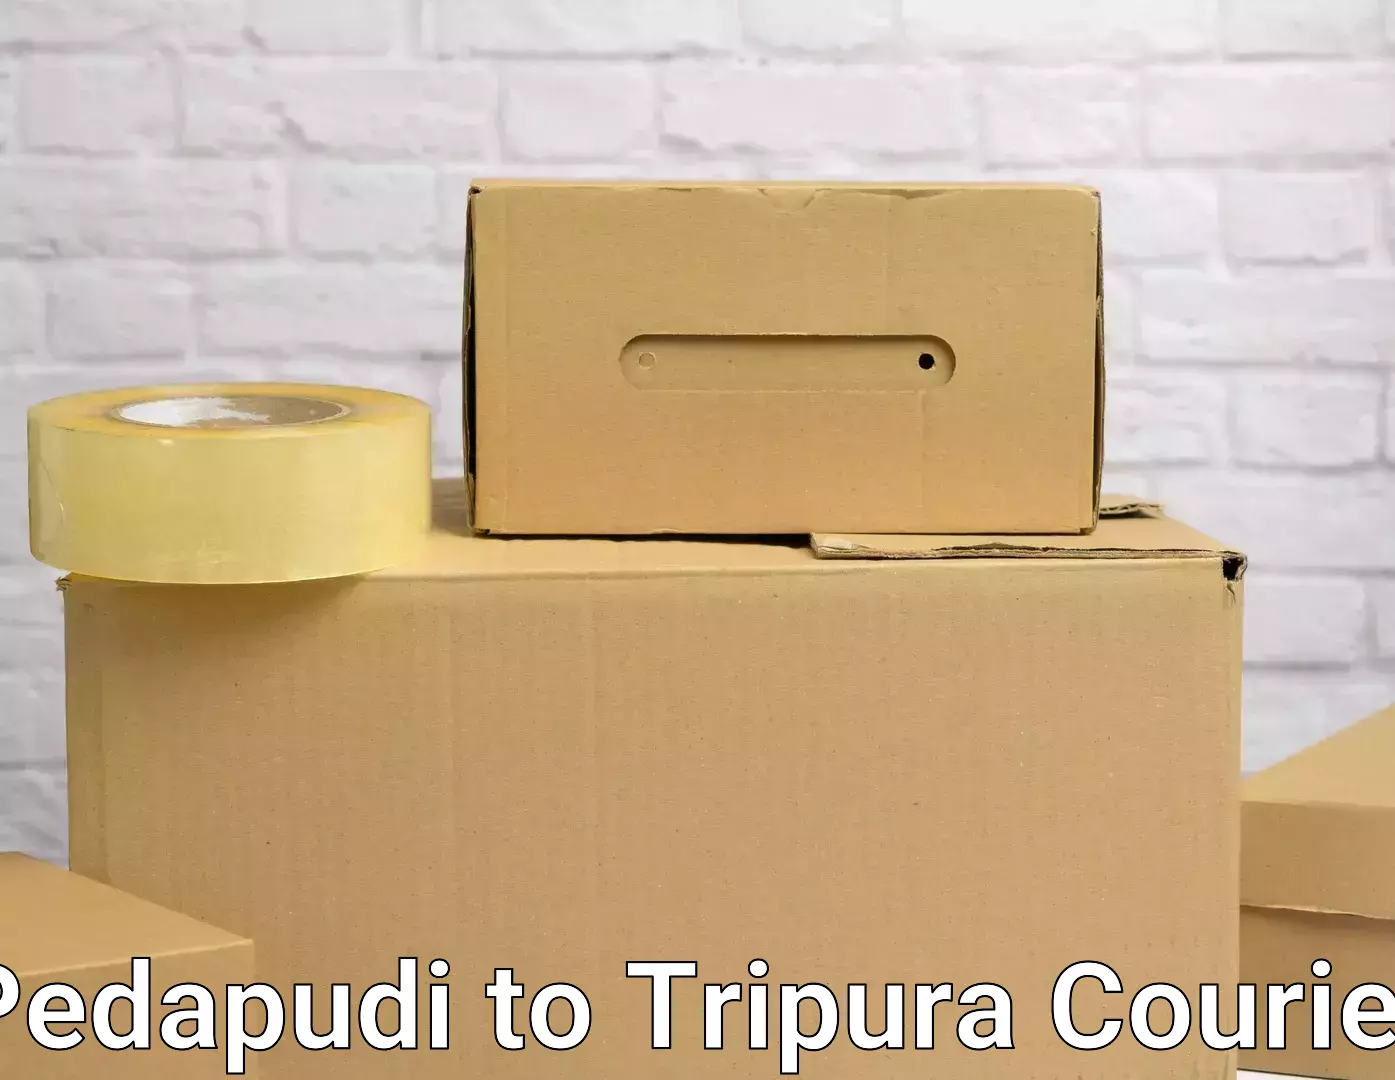 Home shifting services Pedapudi to Udaipur Tripura